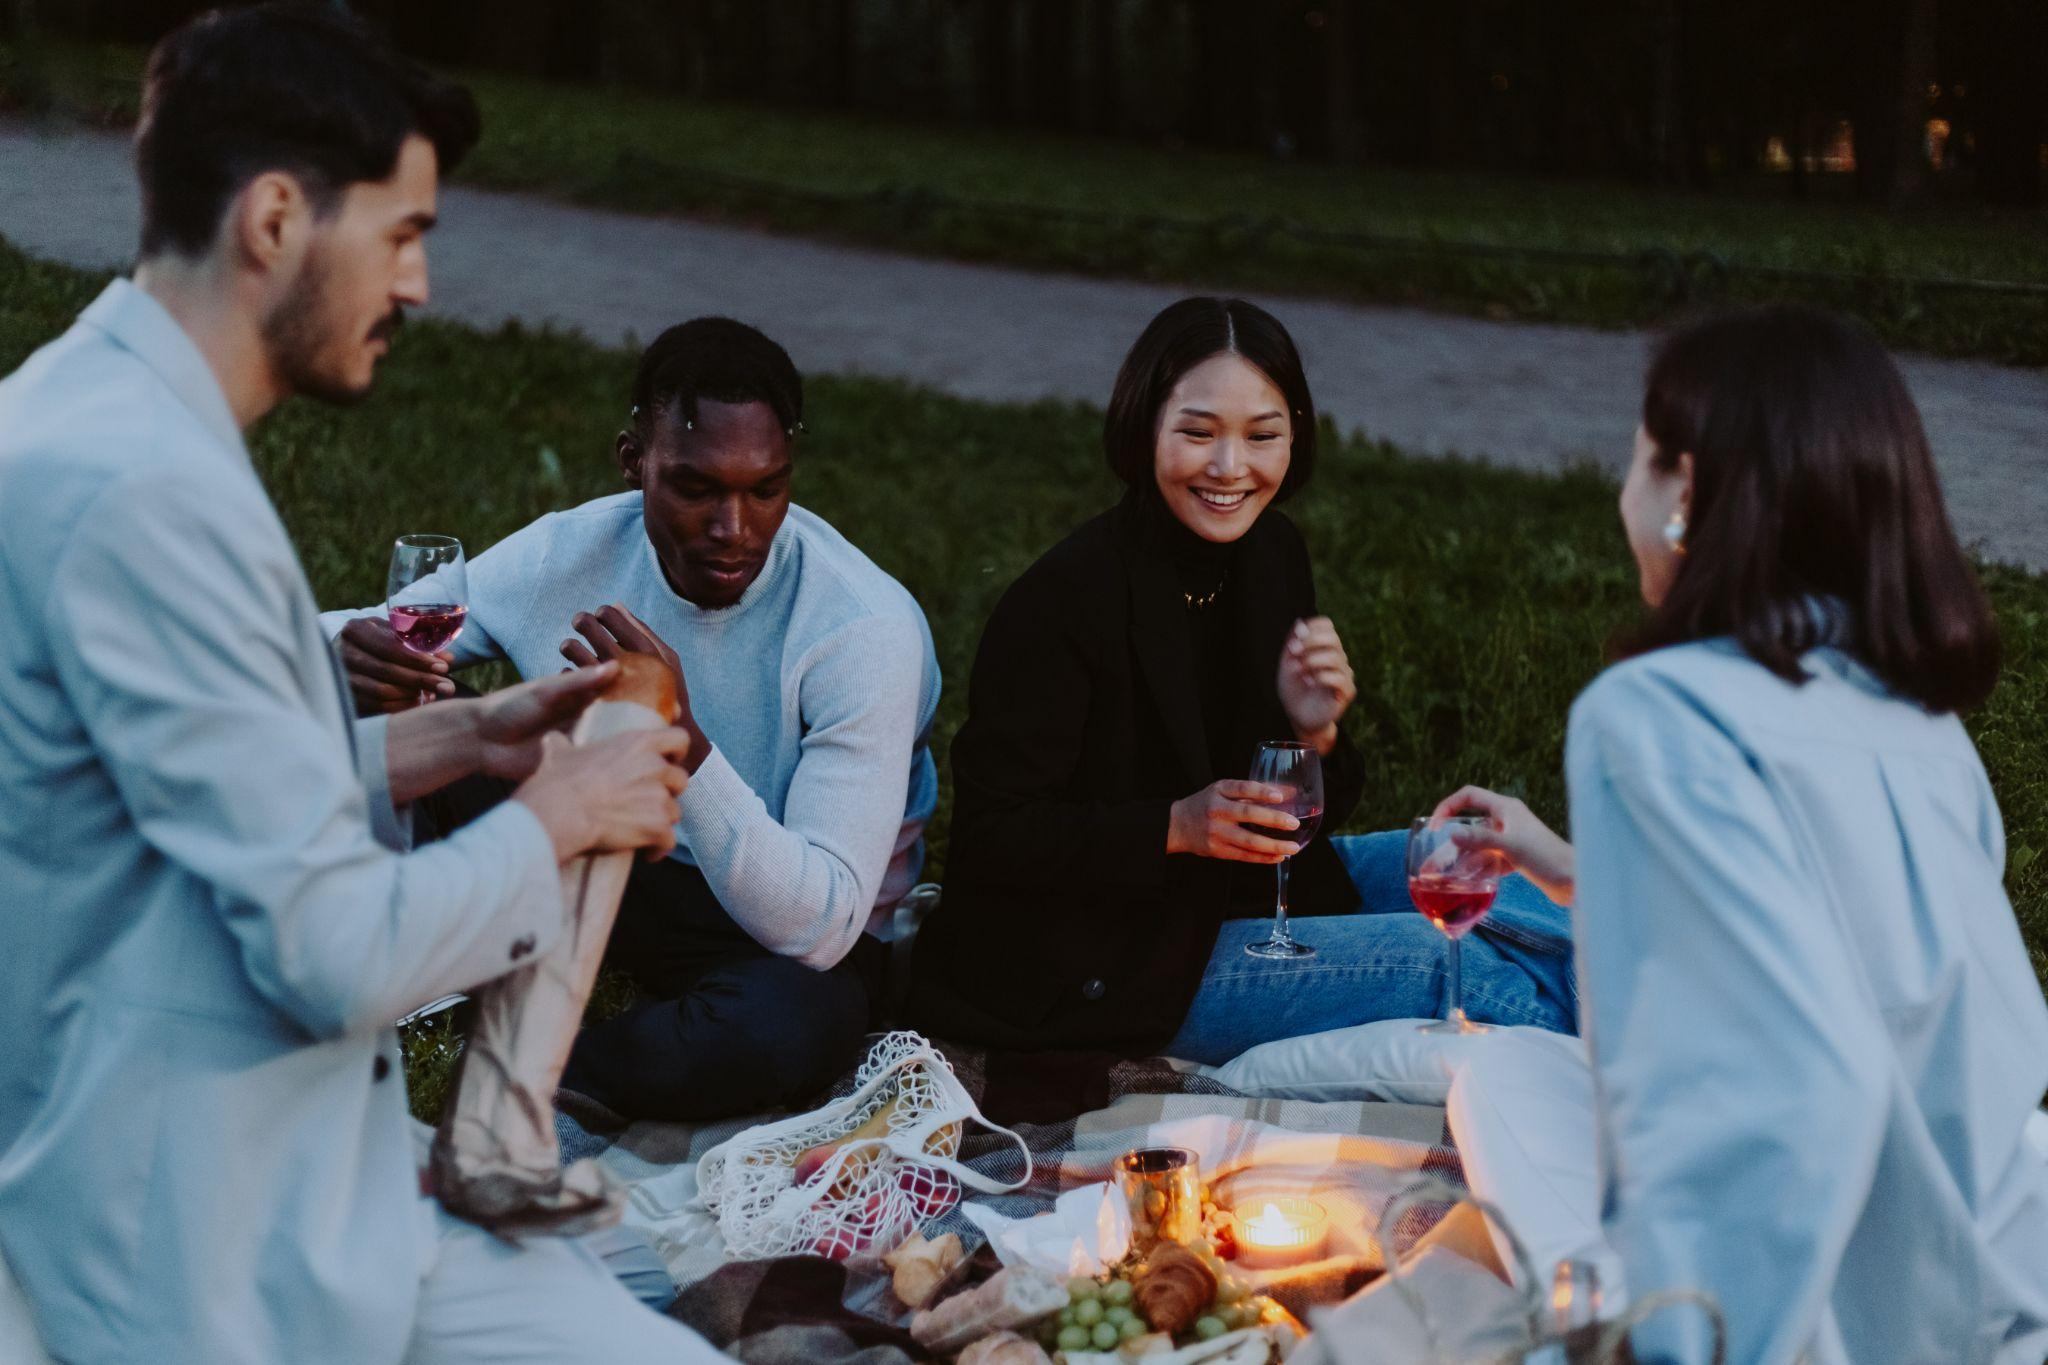 A group of friends sitting on a picnic blanket while having Cconversation